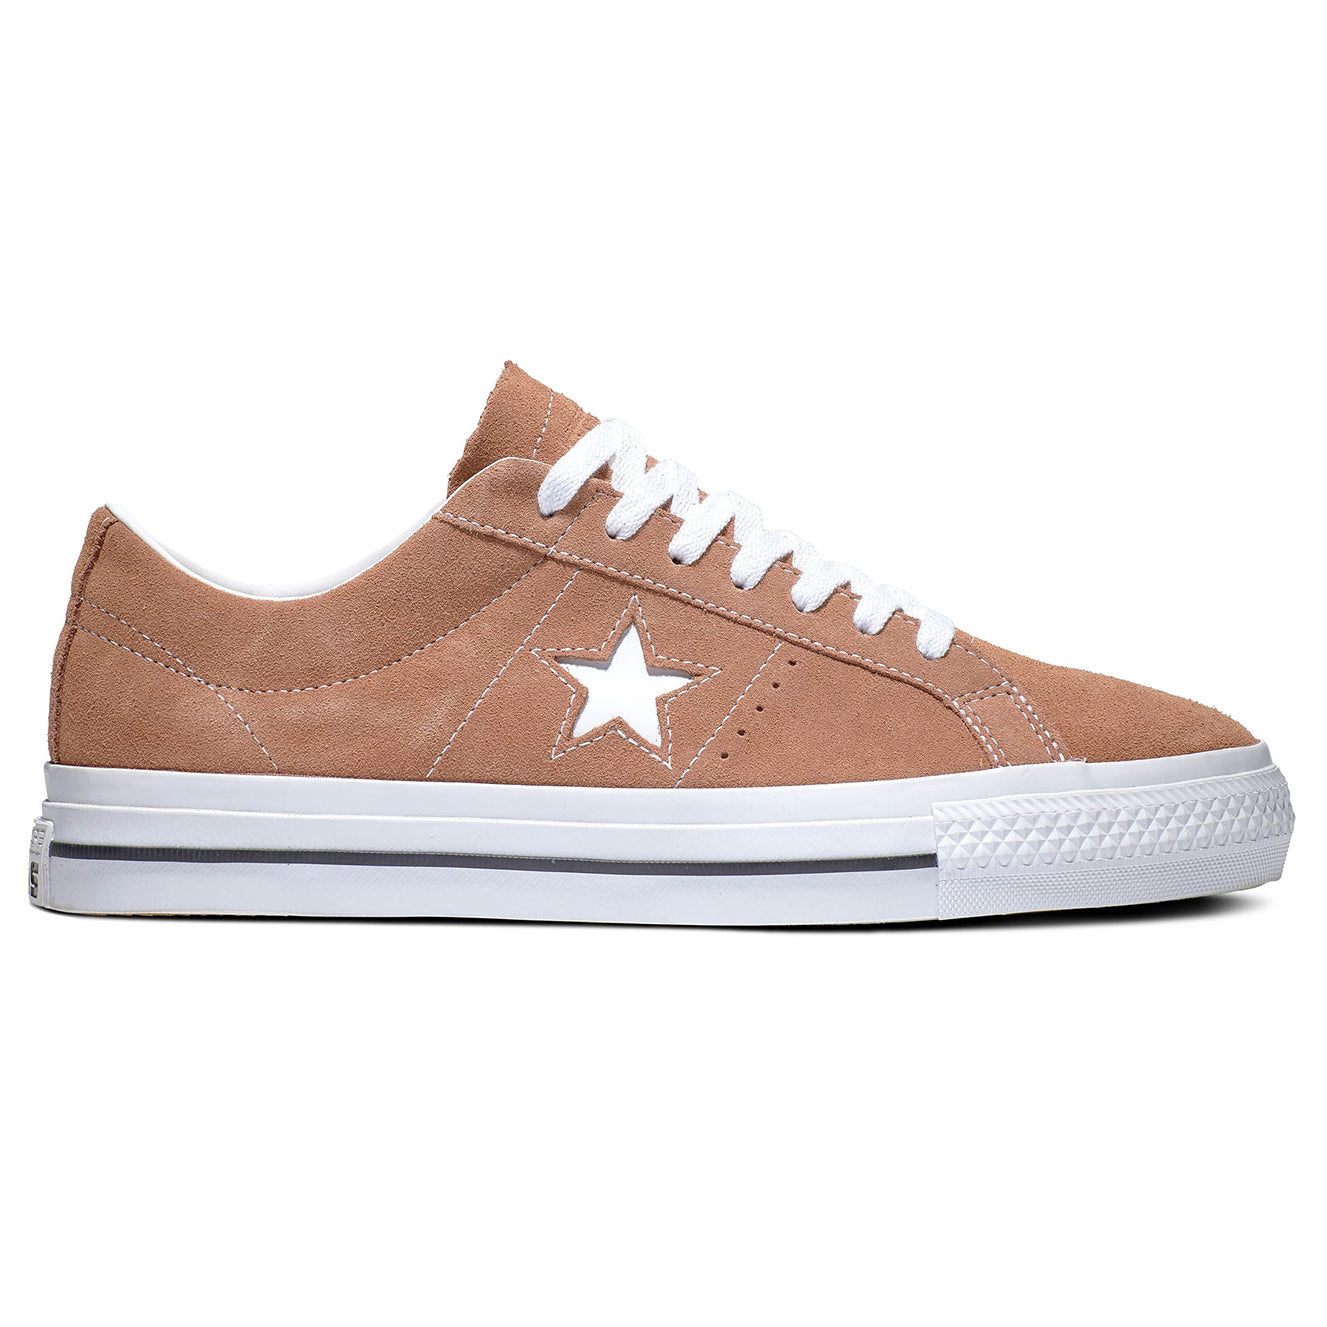 Converse CONS One Star Pro Mineral Clay/White